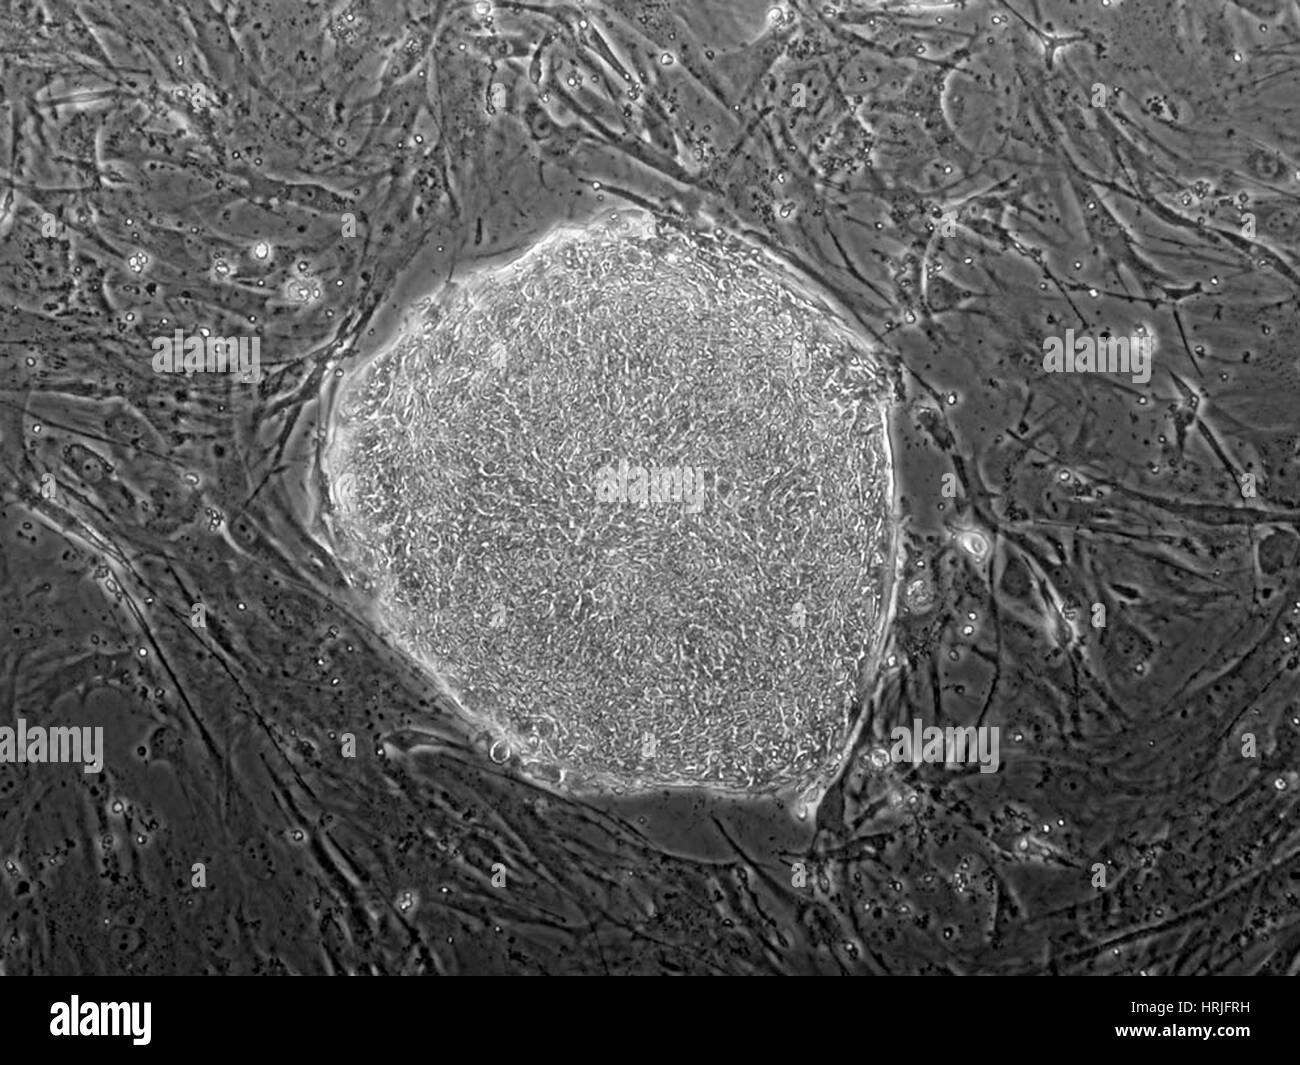 Human Embryonic Stem Cell Line ES03 Stock Photo